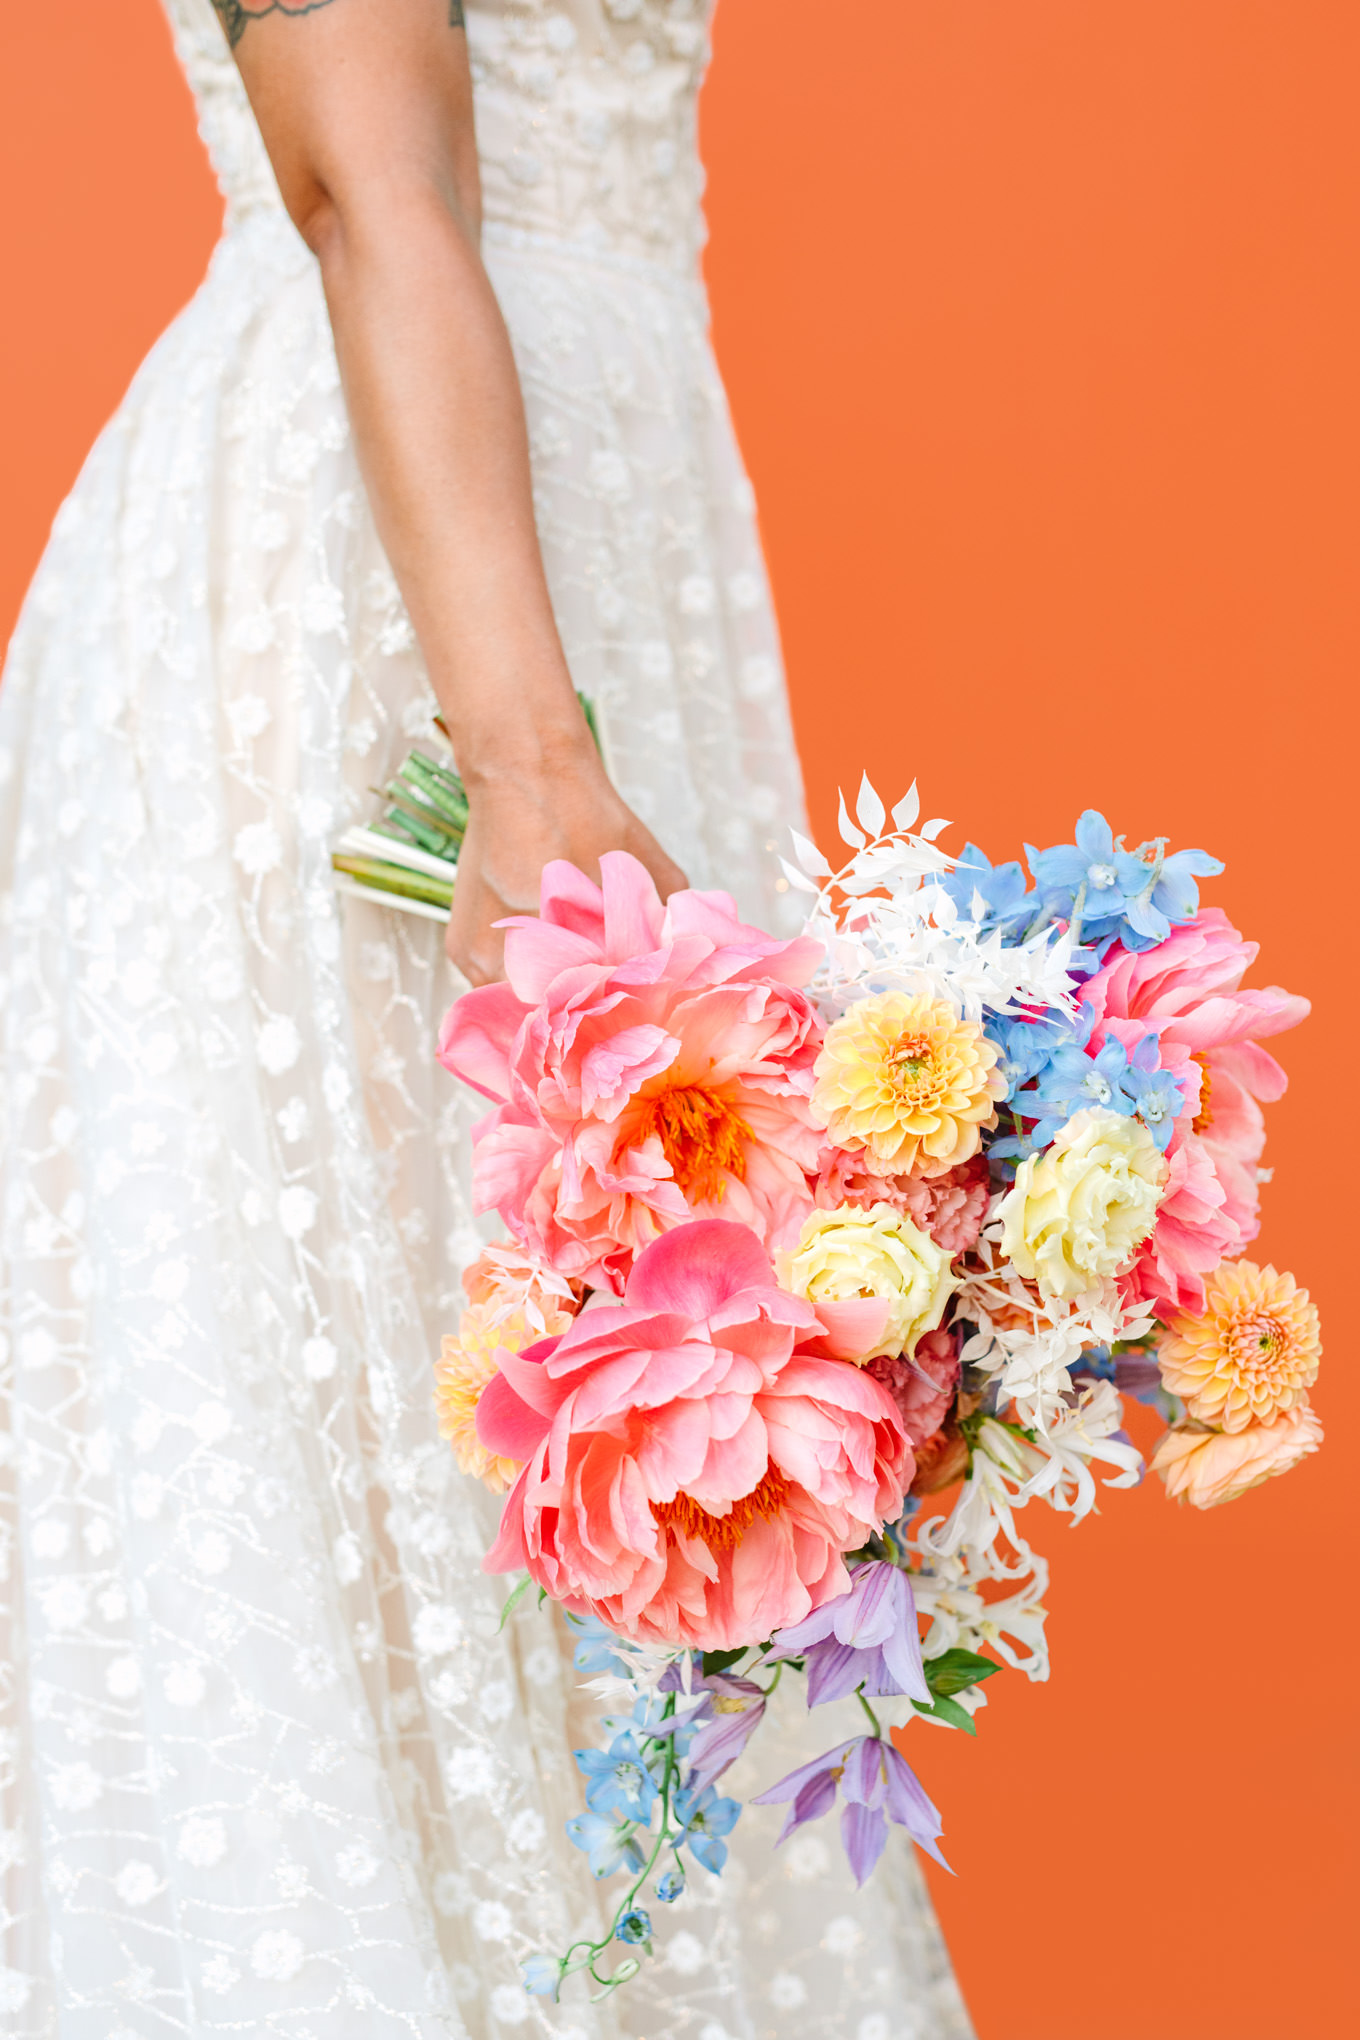 Colorful wedding bouquet on Pronovias gown | Colorful pop-up micro wedding at The Ruby Street Los Angeles featured on Green Wedding Shoes | Colorful and elevated photography for fun-loving couples in Southern California | #colorfulwedding #popupwedding #weddingphotography #microwedding Source: Mary Costa Photography | Los Angeles